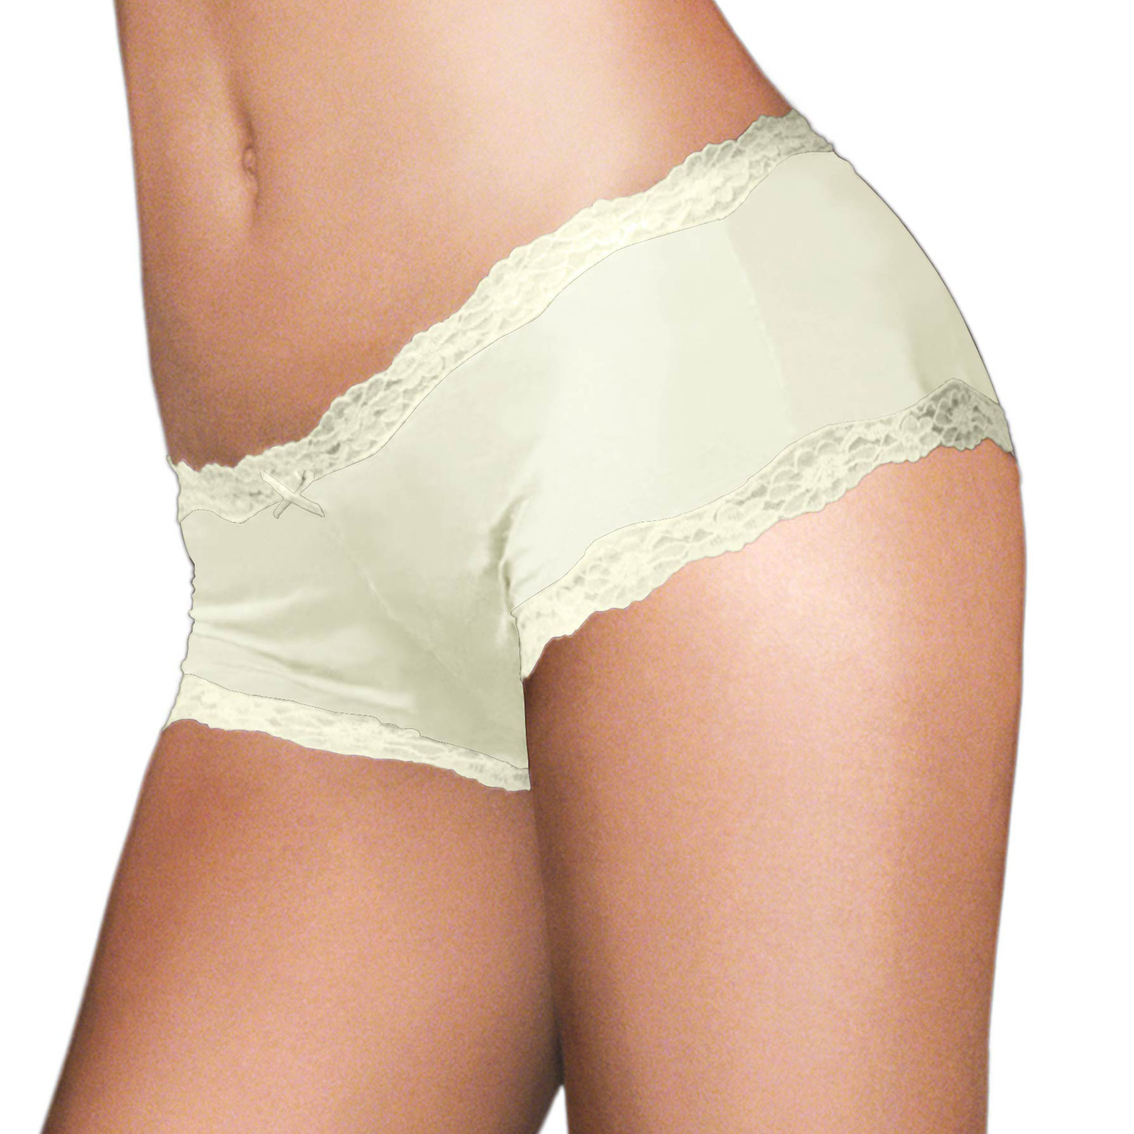 Cheeky Lace Hipster  Maidenform, Lace panties, Hipster